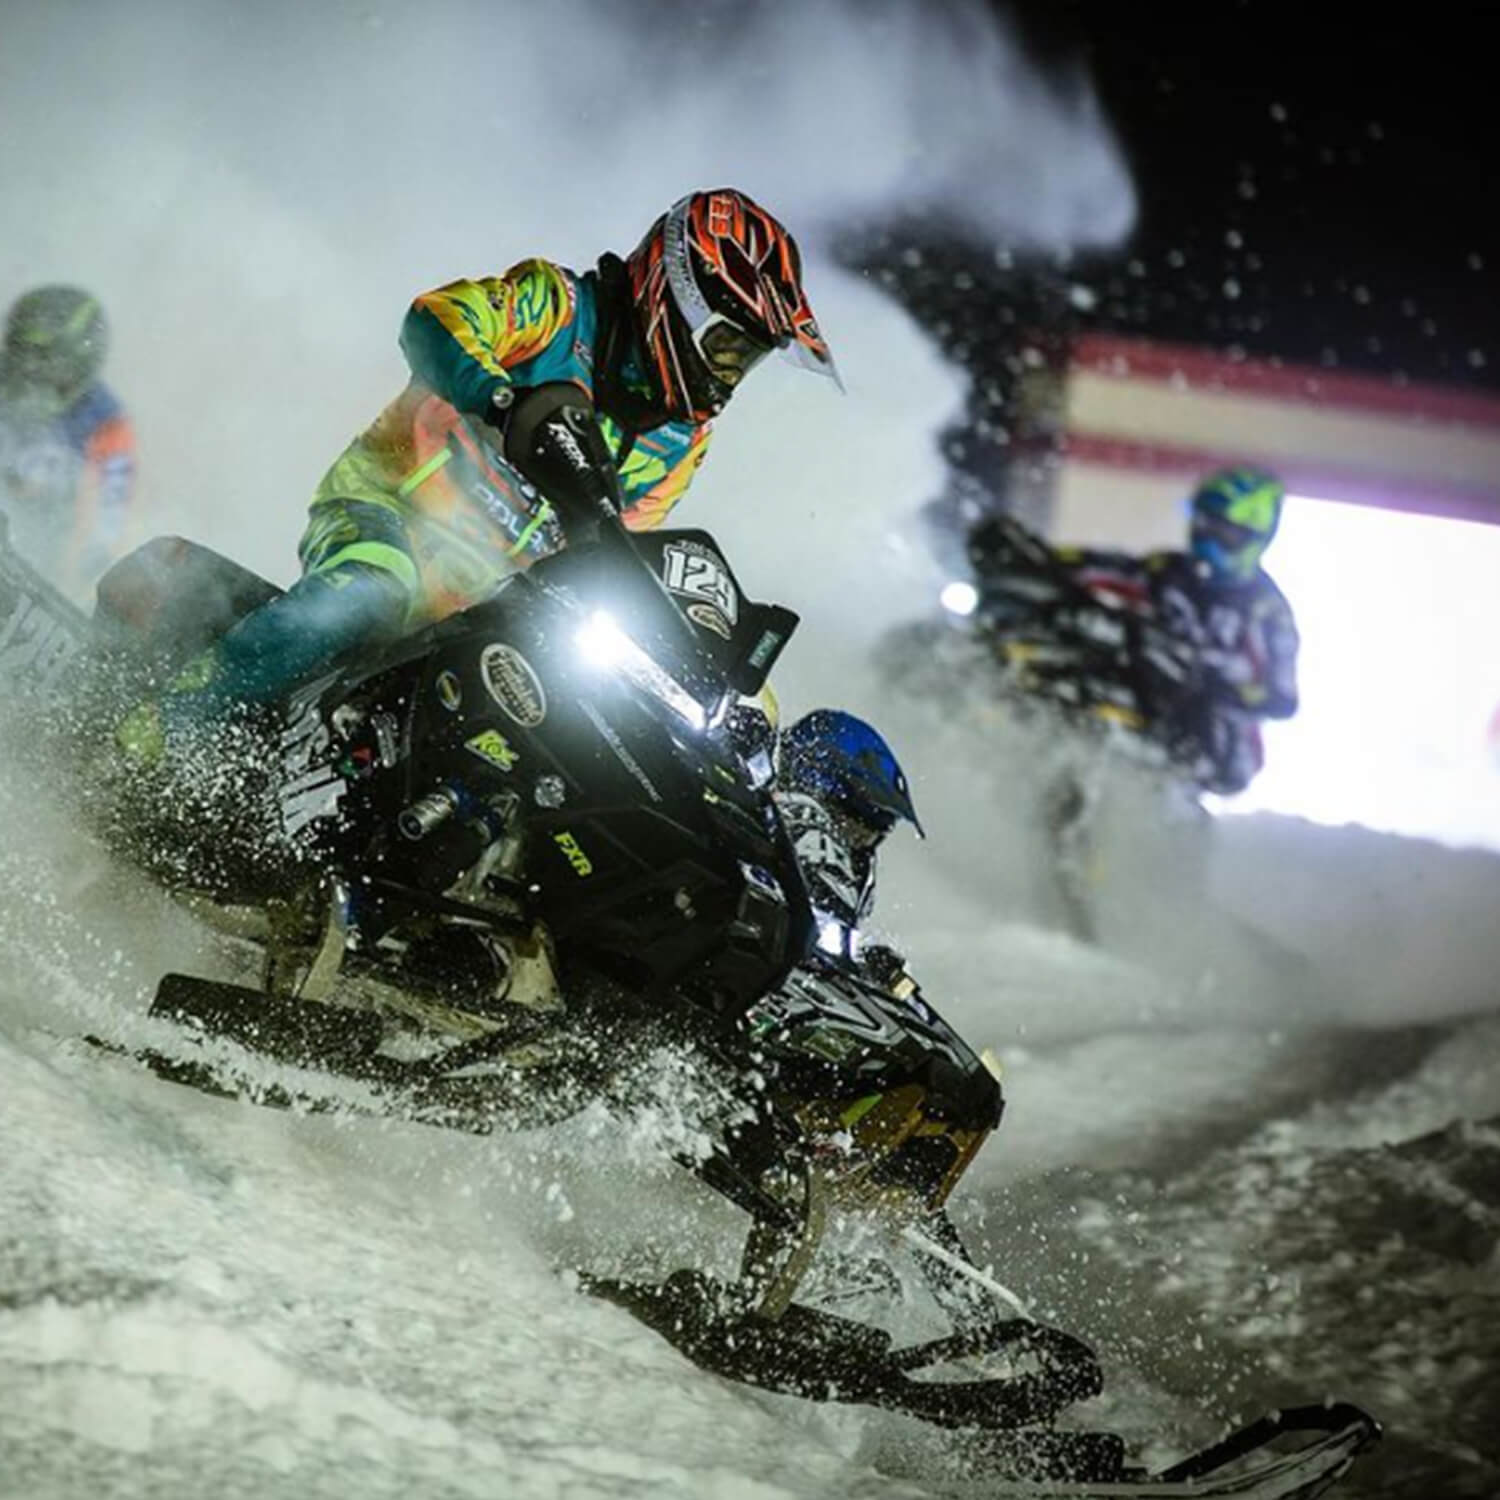 Snocross racer Eric Downs racing for Frattalone Racing on snowmobile with black C&A Pro XT skis with black cornering kits